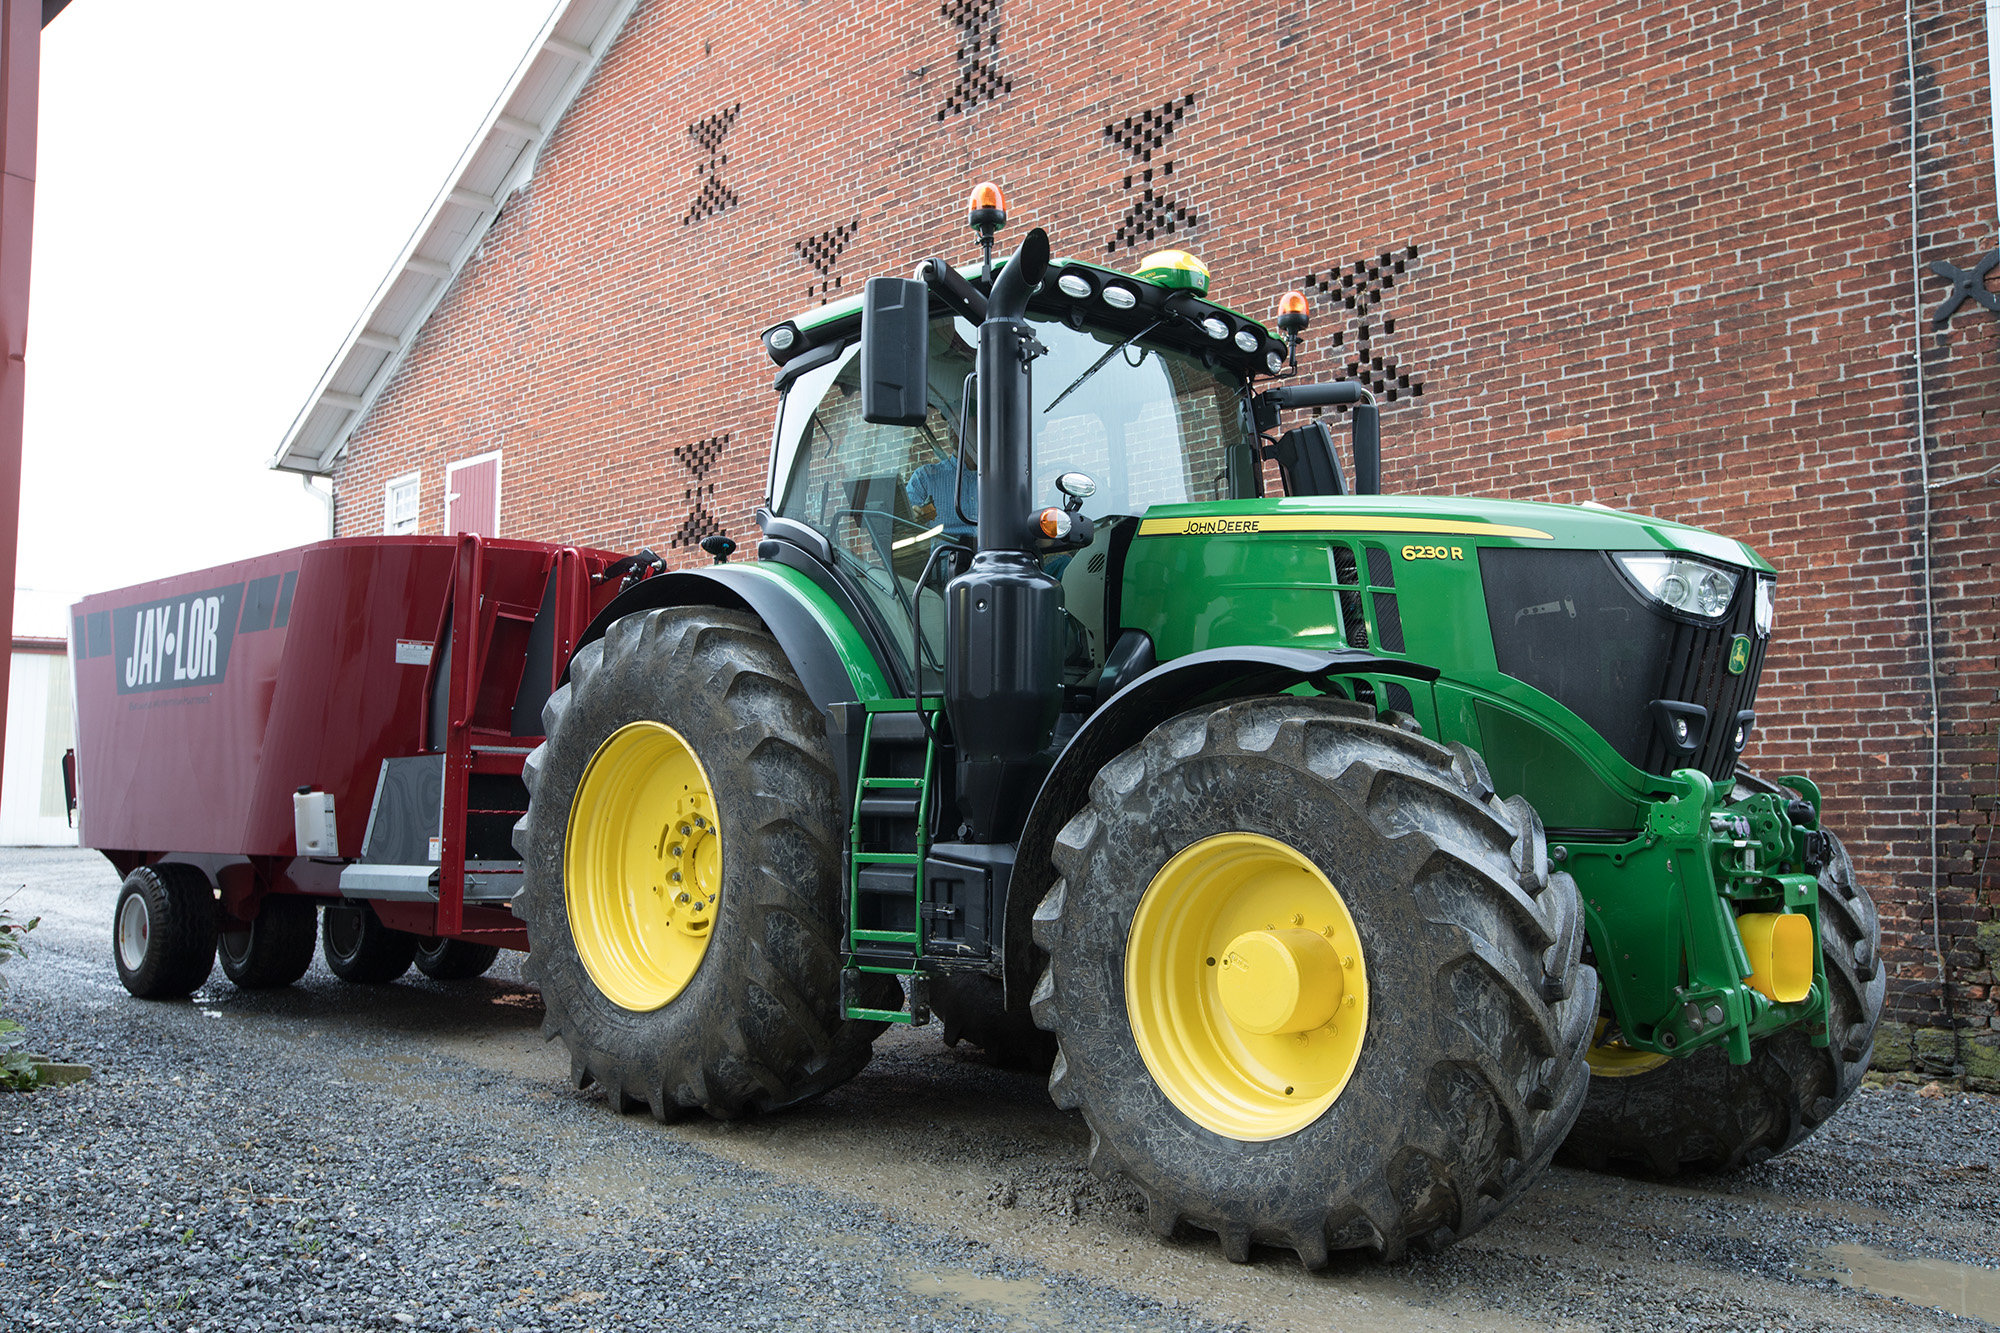 Deere Adds More Power, Faster Acceleration to 6R Tractor Lineup to Better Meet Producer Needs